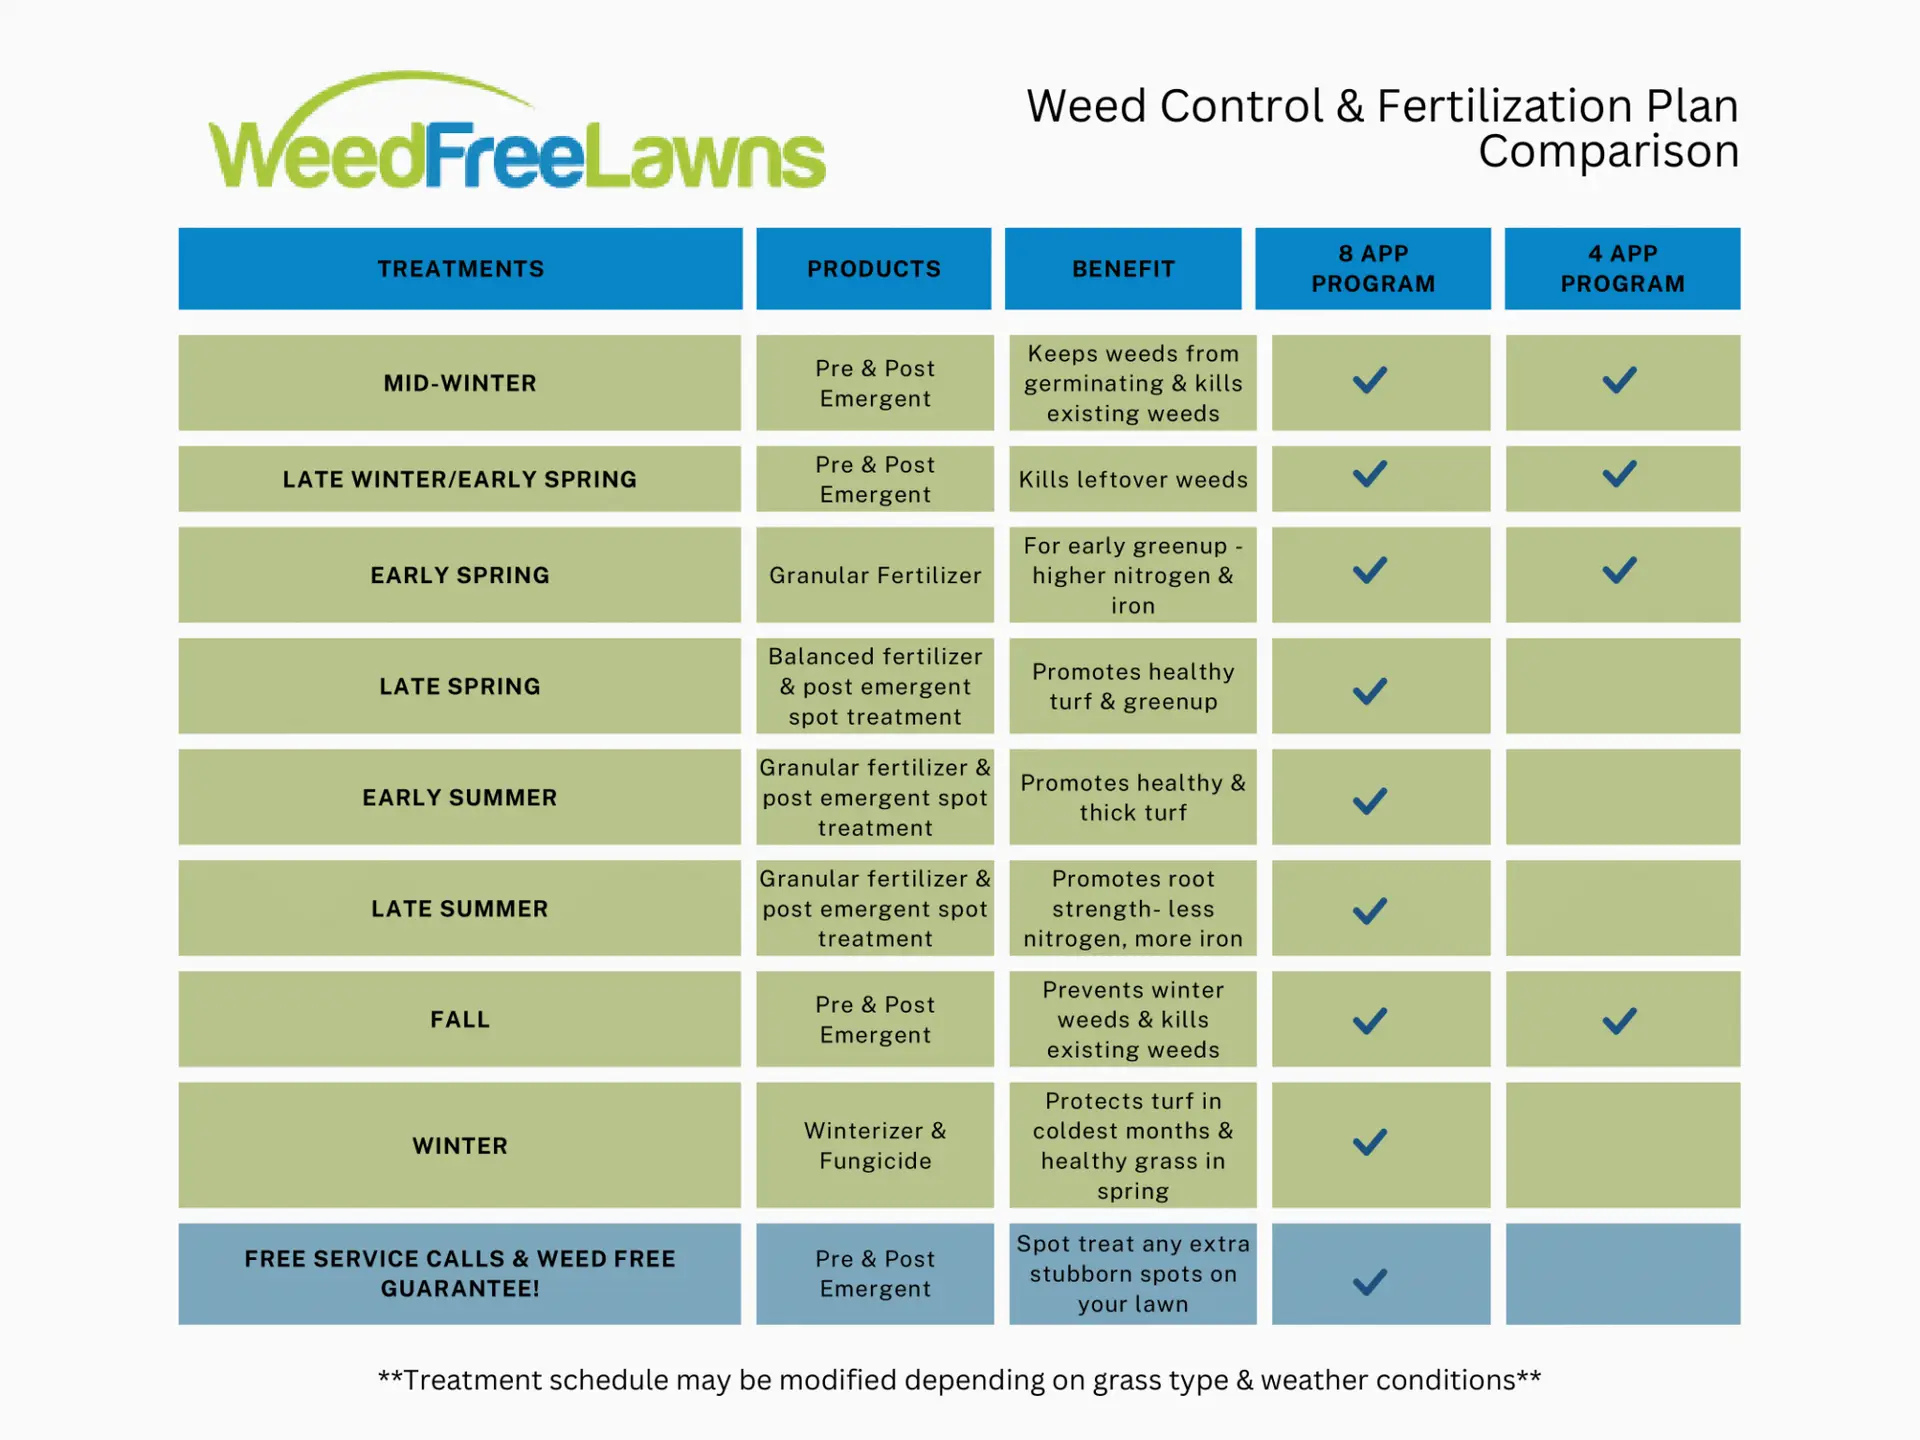 Weed Free Lawns - Weed Control Chart